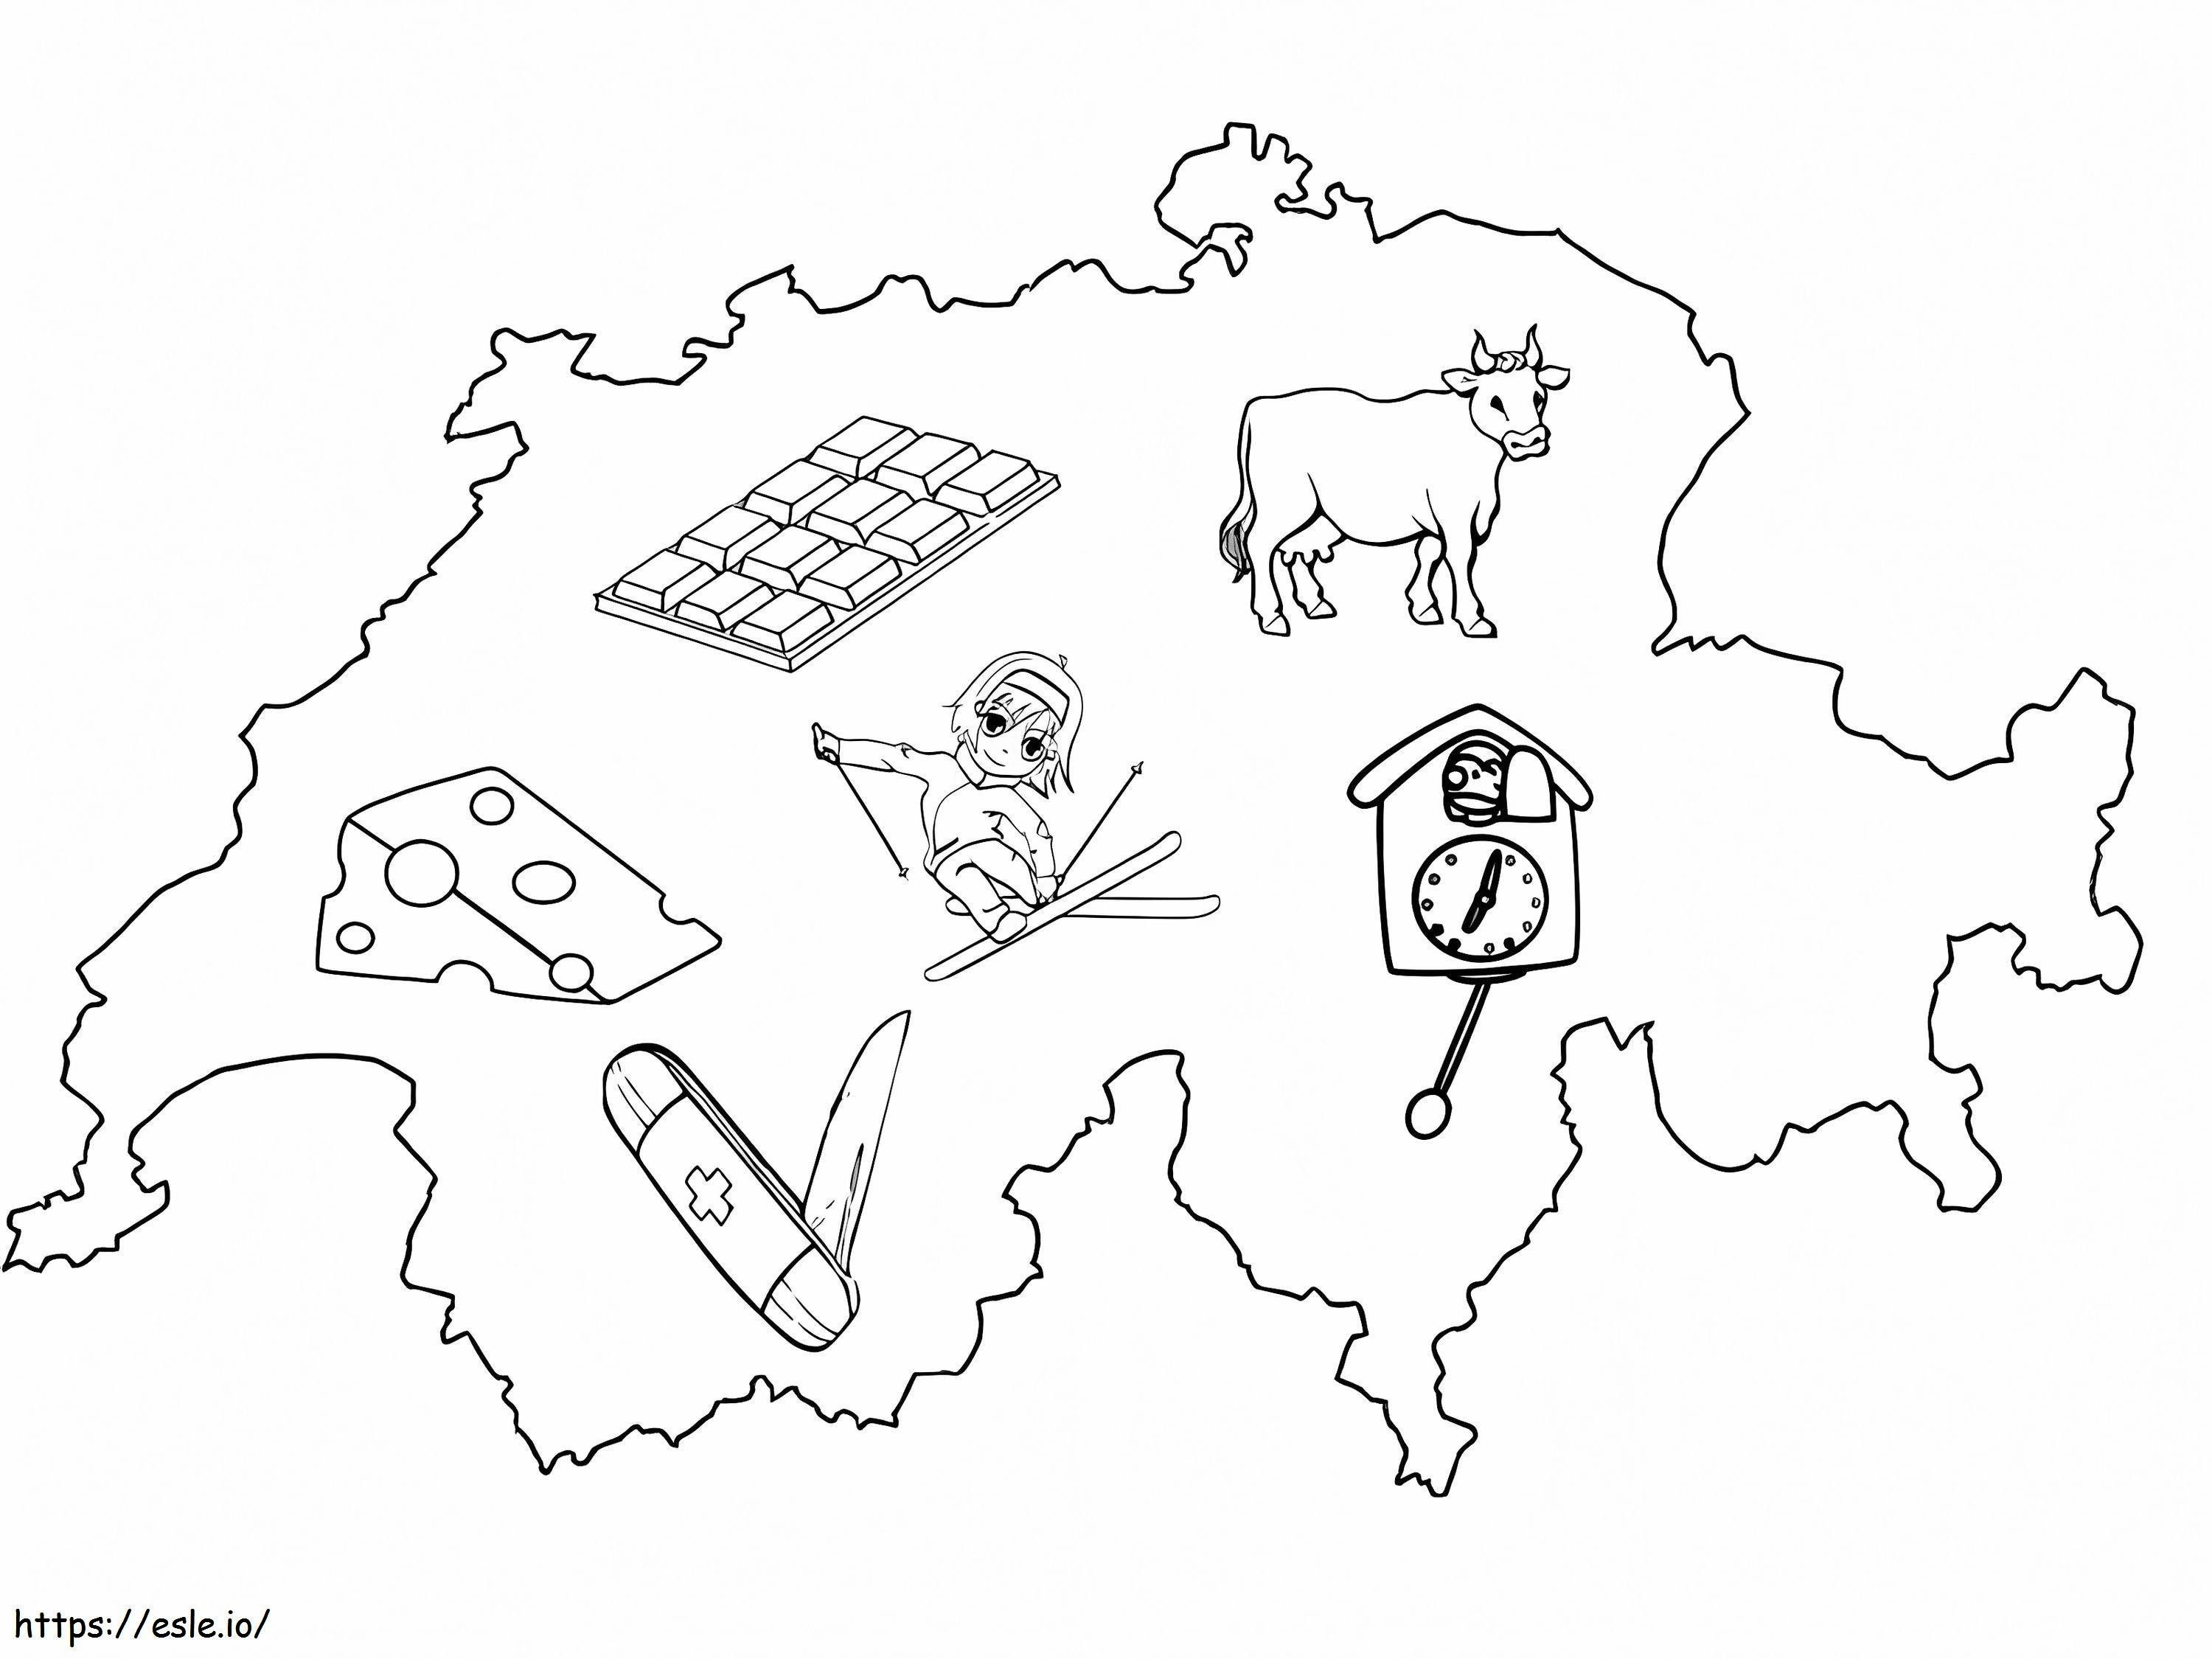 Printable Switzerland coloring page